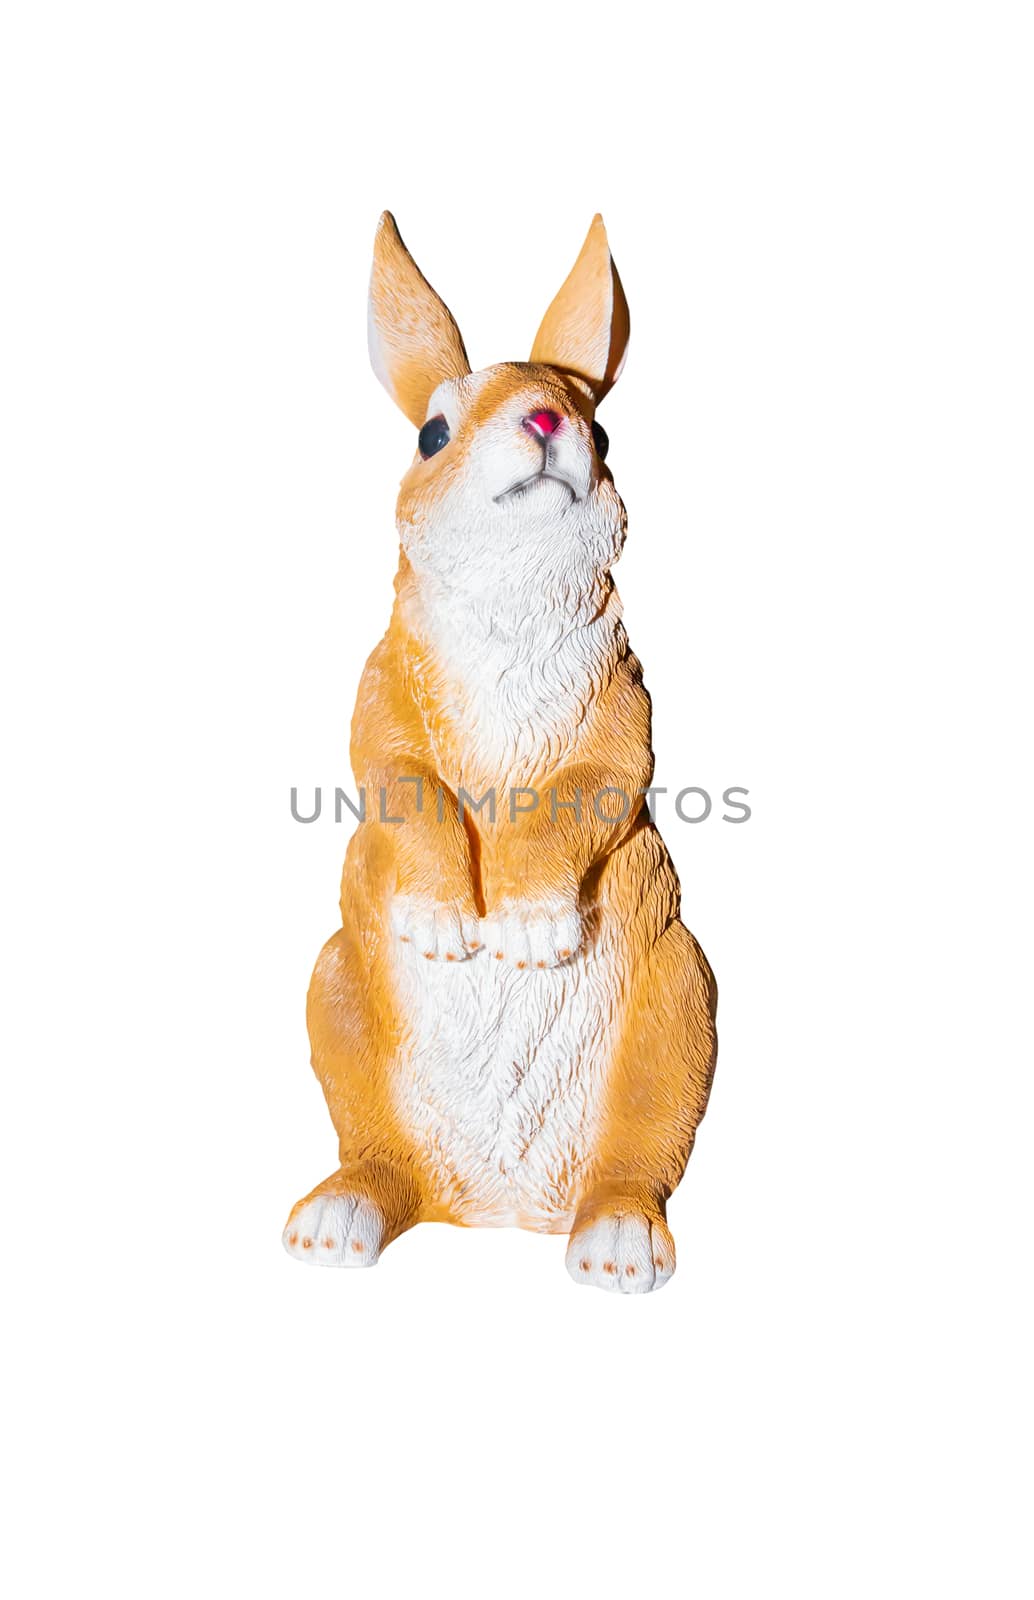 rabbits stucco isolated on a white background by pramot